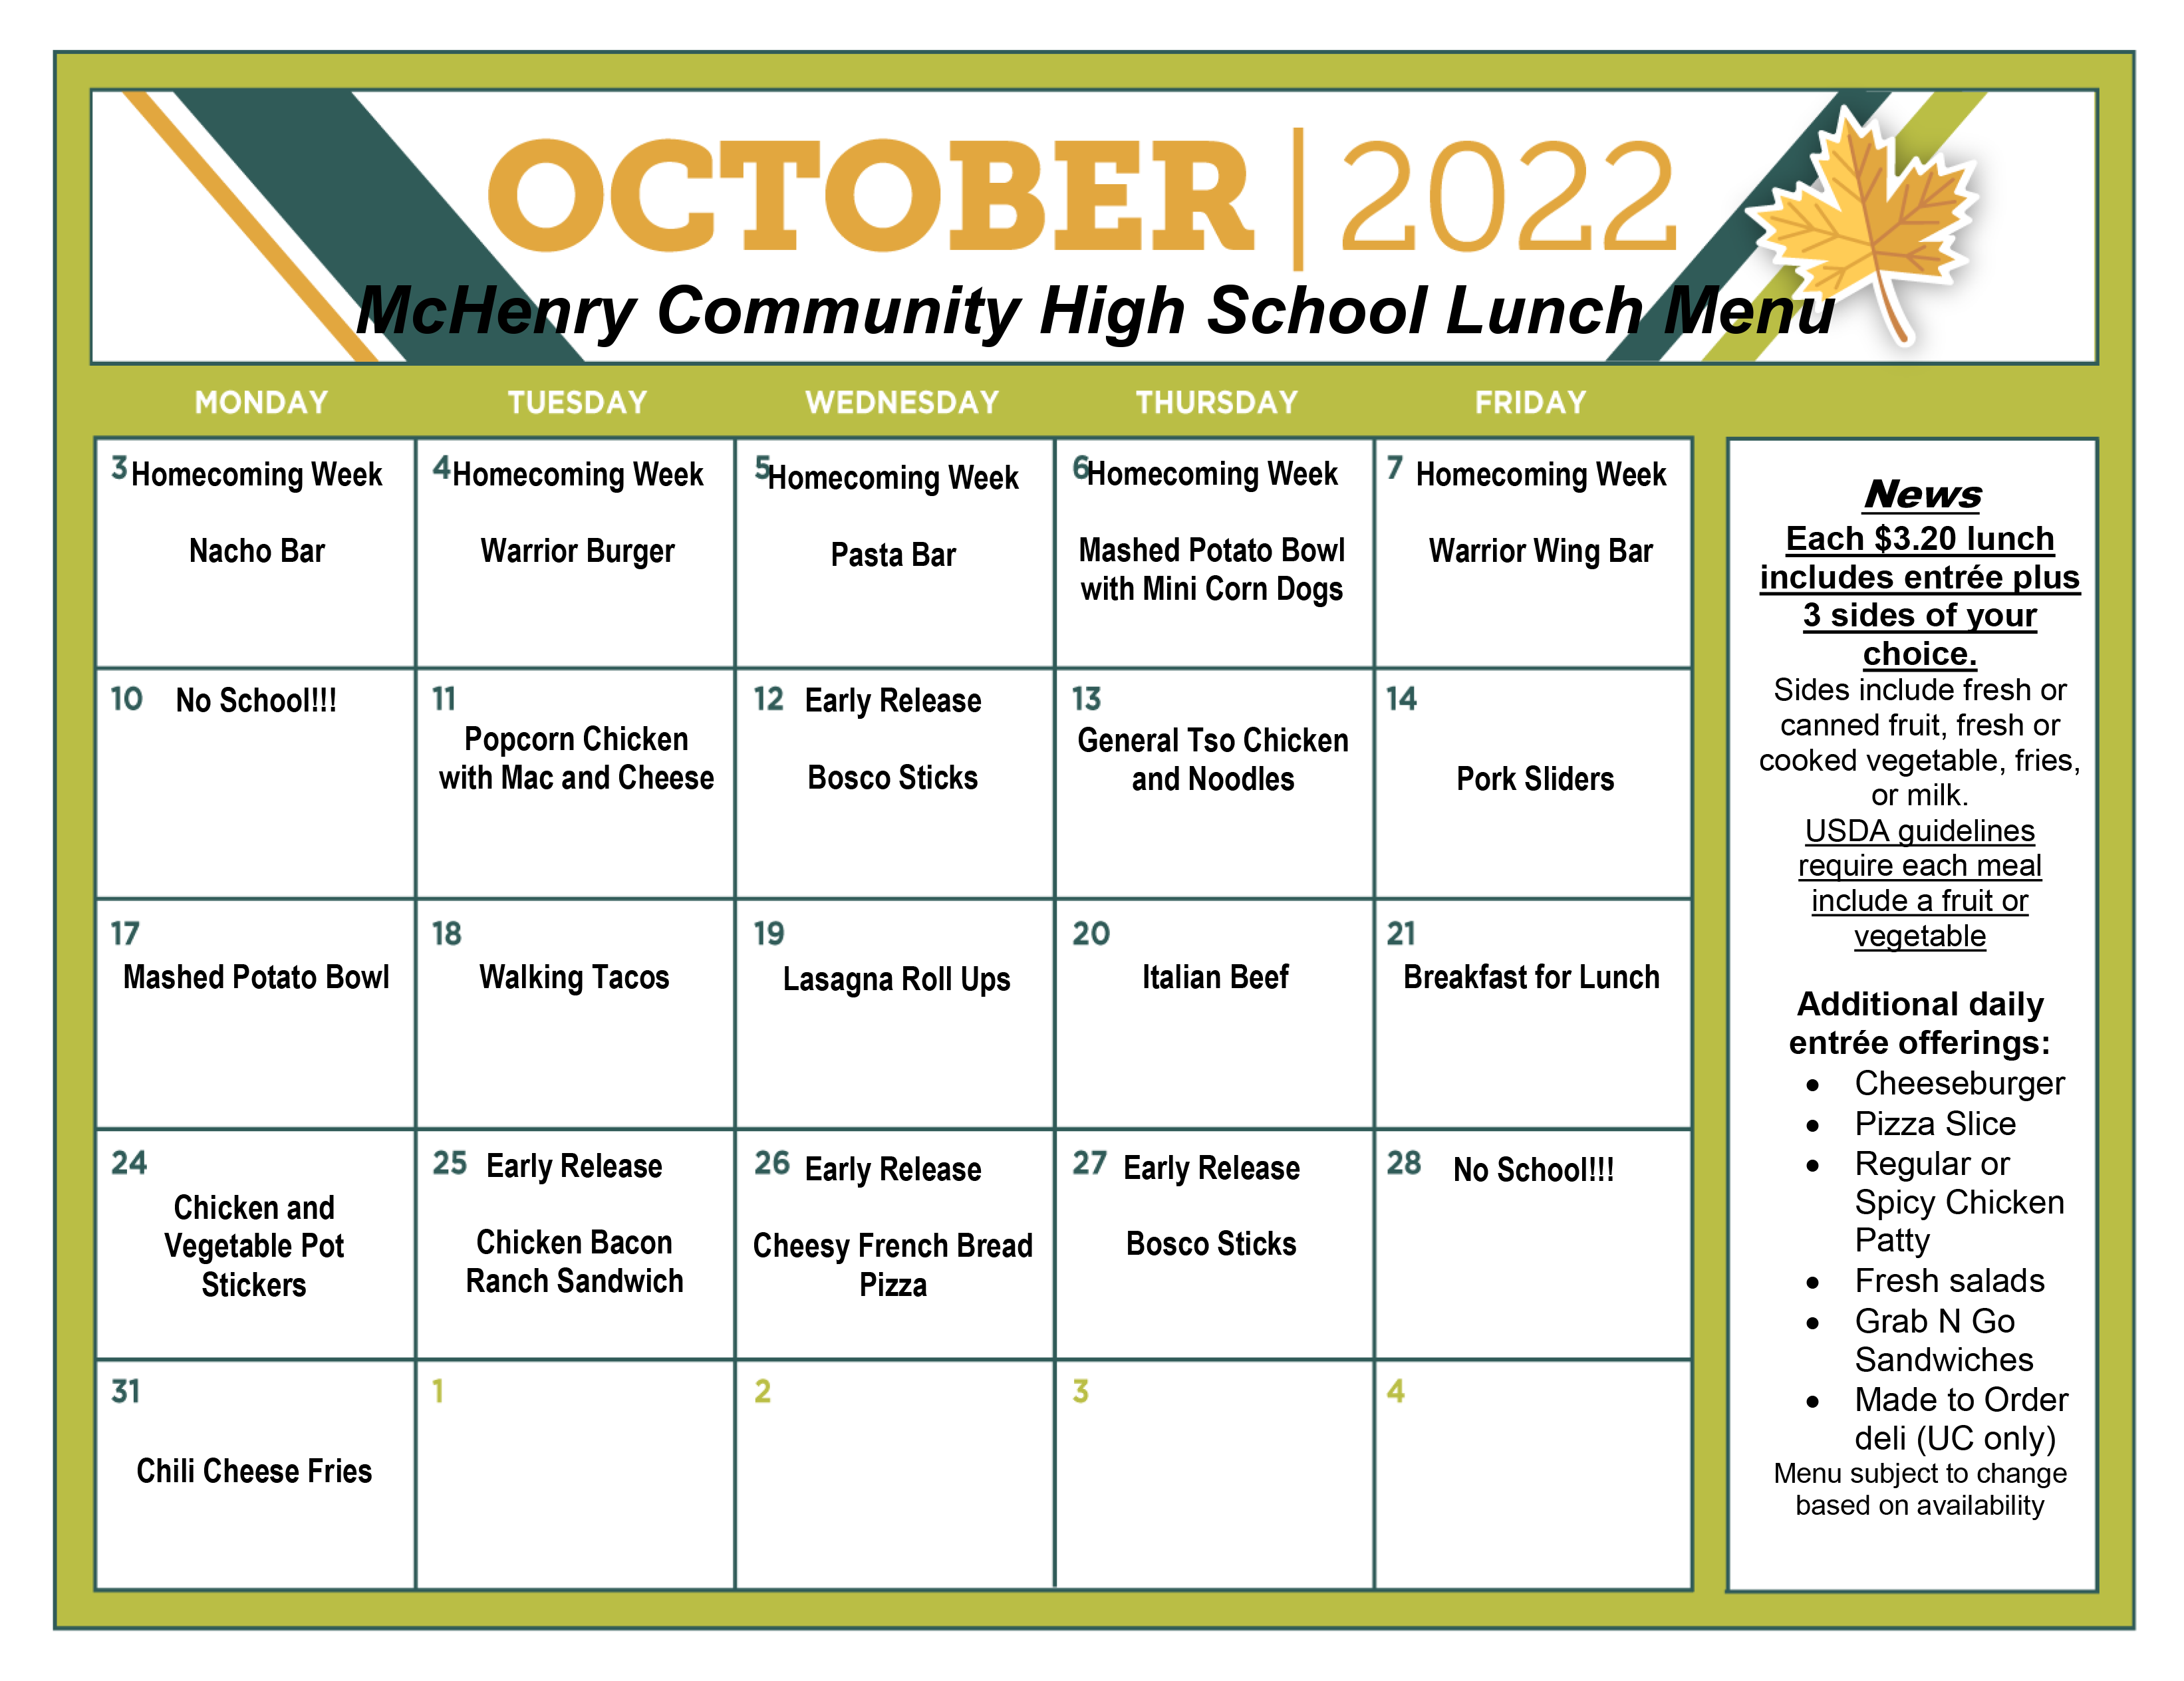 October 2022 McHenry Community High School Lunch Menu Mon. October 3: Homecoming Week Nacho Bar, Tuesday Oct. 4- Homecoming Week Warrior Burger, Wednesday Oct. 5 Homecoming Week Pasta Bar, Thursday October 6- Homecoming Week Mashed Potato Bowl with Mini Corn Dogs. Friday, Oct. 7 Homecoming Week, Warrior Wing Bar, Monday Oct, 10: No School, Tuesday Oct. 11- Popcorn chicken with mac and cheese, Wednesday Oct. 12- Early Release Bosco Sticks, Thursday Oct. 13: General Tso Chicken and Noodles, Friday Oct. 14- Pork Sliders, Monday Oct. 17 Mashed Potato Bowl, Tuesday, Oct. 18 Walking Tacos, Wednesday Oct. 18 Lasagna Roll Ups, Thursday, Oct. 20 Italian beef, Friday Oct. 21 Breakfast for Lunch, Monday, Oct. 24 chicken and vegetable pot stickers, Tuesday, Oct. 25 Early Release Chicken Bacon Ranch Sandwich, Wednesday, Oct. 26 Early Release Cheesy French Bread Pizza, Thursday, Oct. 27 Early Release Bosco Sticks, Friday, Oct. 28 No School! Monday, Oct. 31- Chili Cheese Fries. News: Each $3.20 lunch includes entree plus 3 sideds of your choice, sids include fresh canned fruit, fresh or cooked vegetable, fries or milk. USDA guidelines require each meal to include a fruit or vegetable. Additonal daily entree offerings: Cheeseburger, Pizza Slice, Regular or Spicy Chicken Patty, Fresh Salads, Grab N Go Sandwiches, Made to Order Deli (Upper Campus Only) Menu subject to change based on availability. 